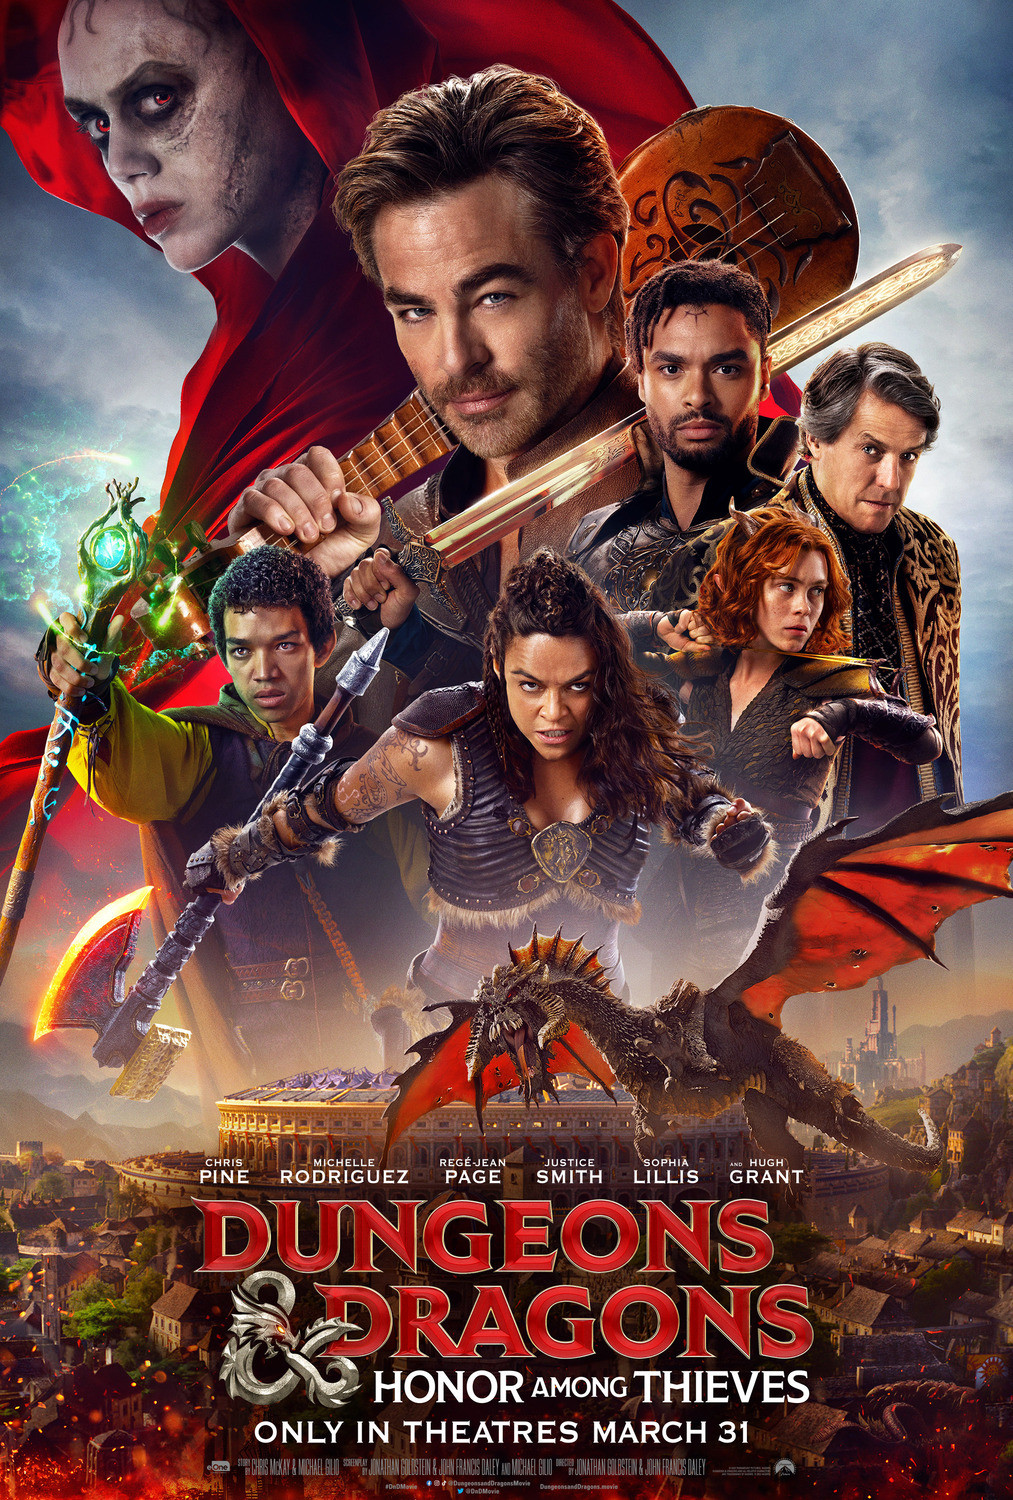 Film review: 'Dungeons & Dragons: Honor Among Thieves' marks a new